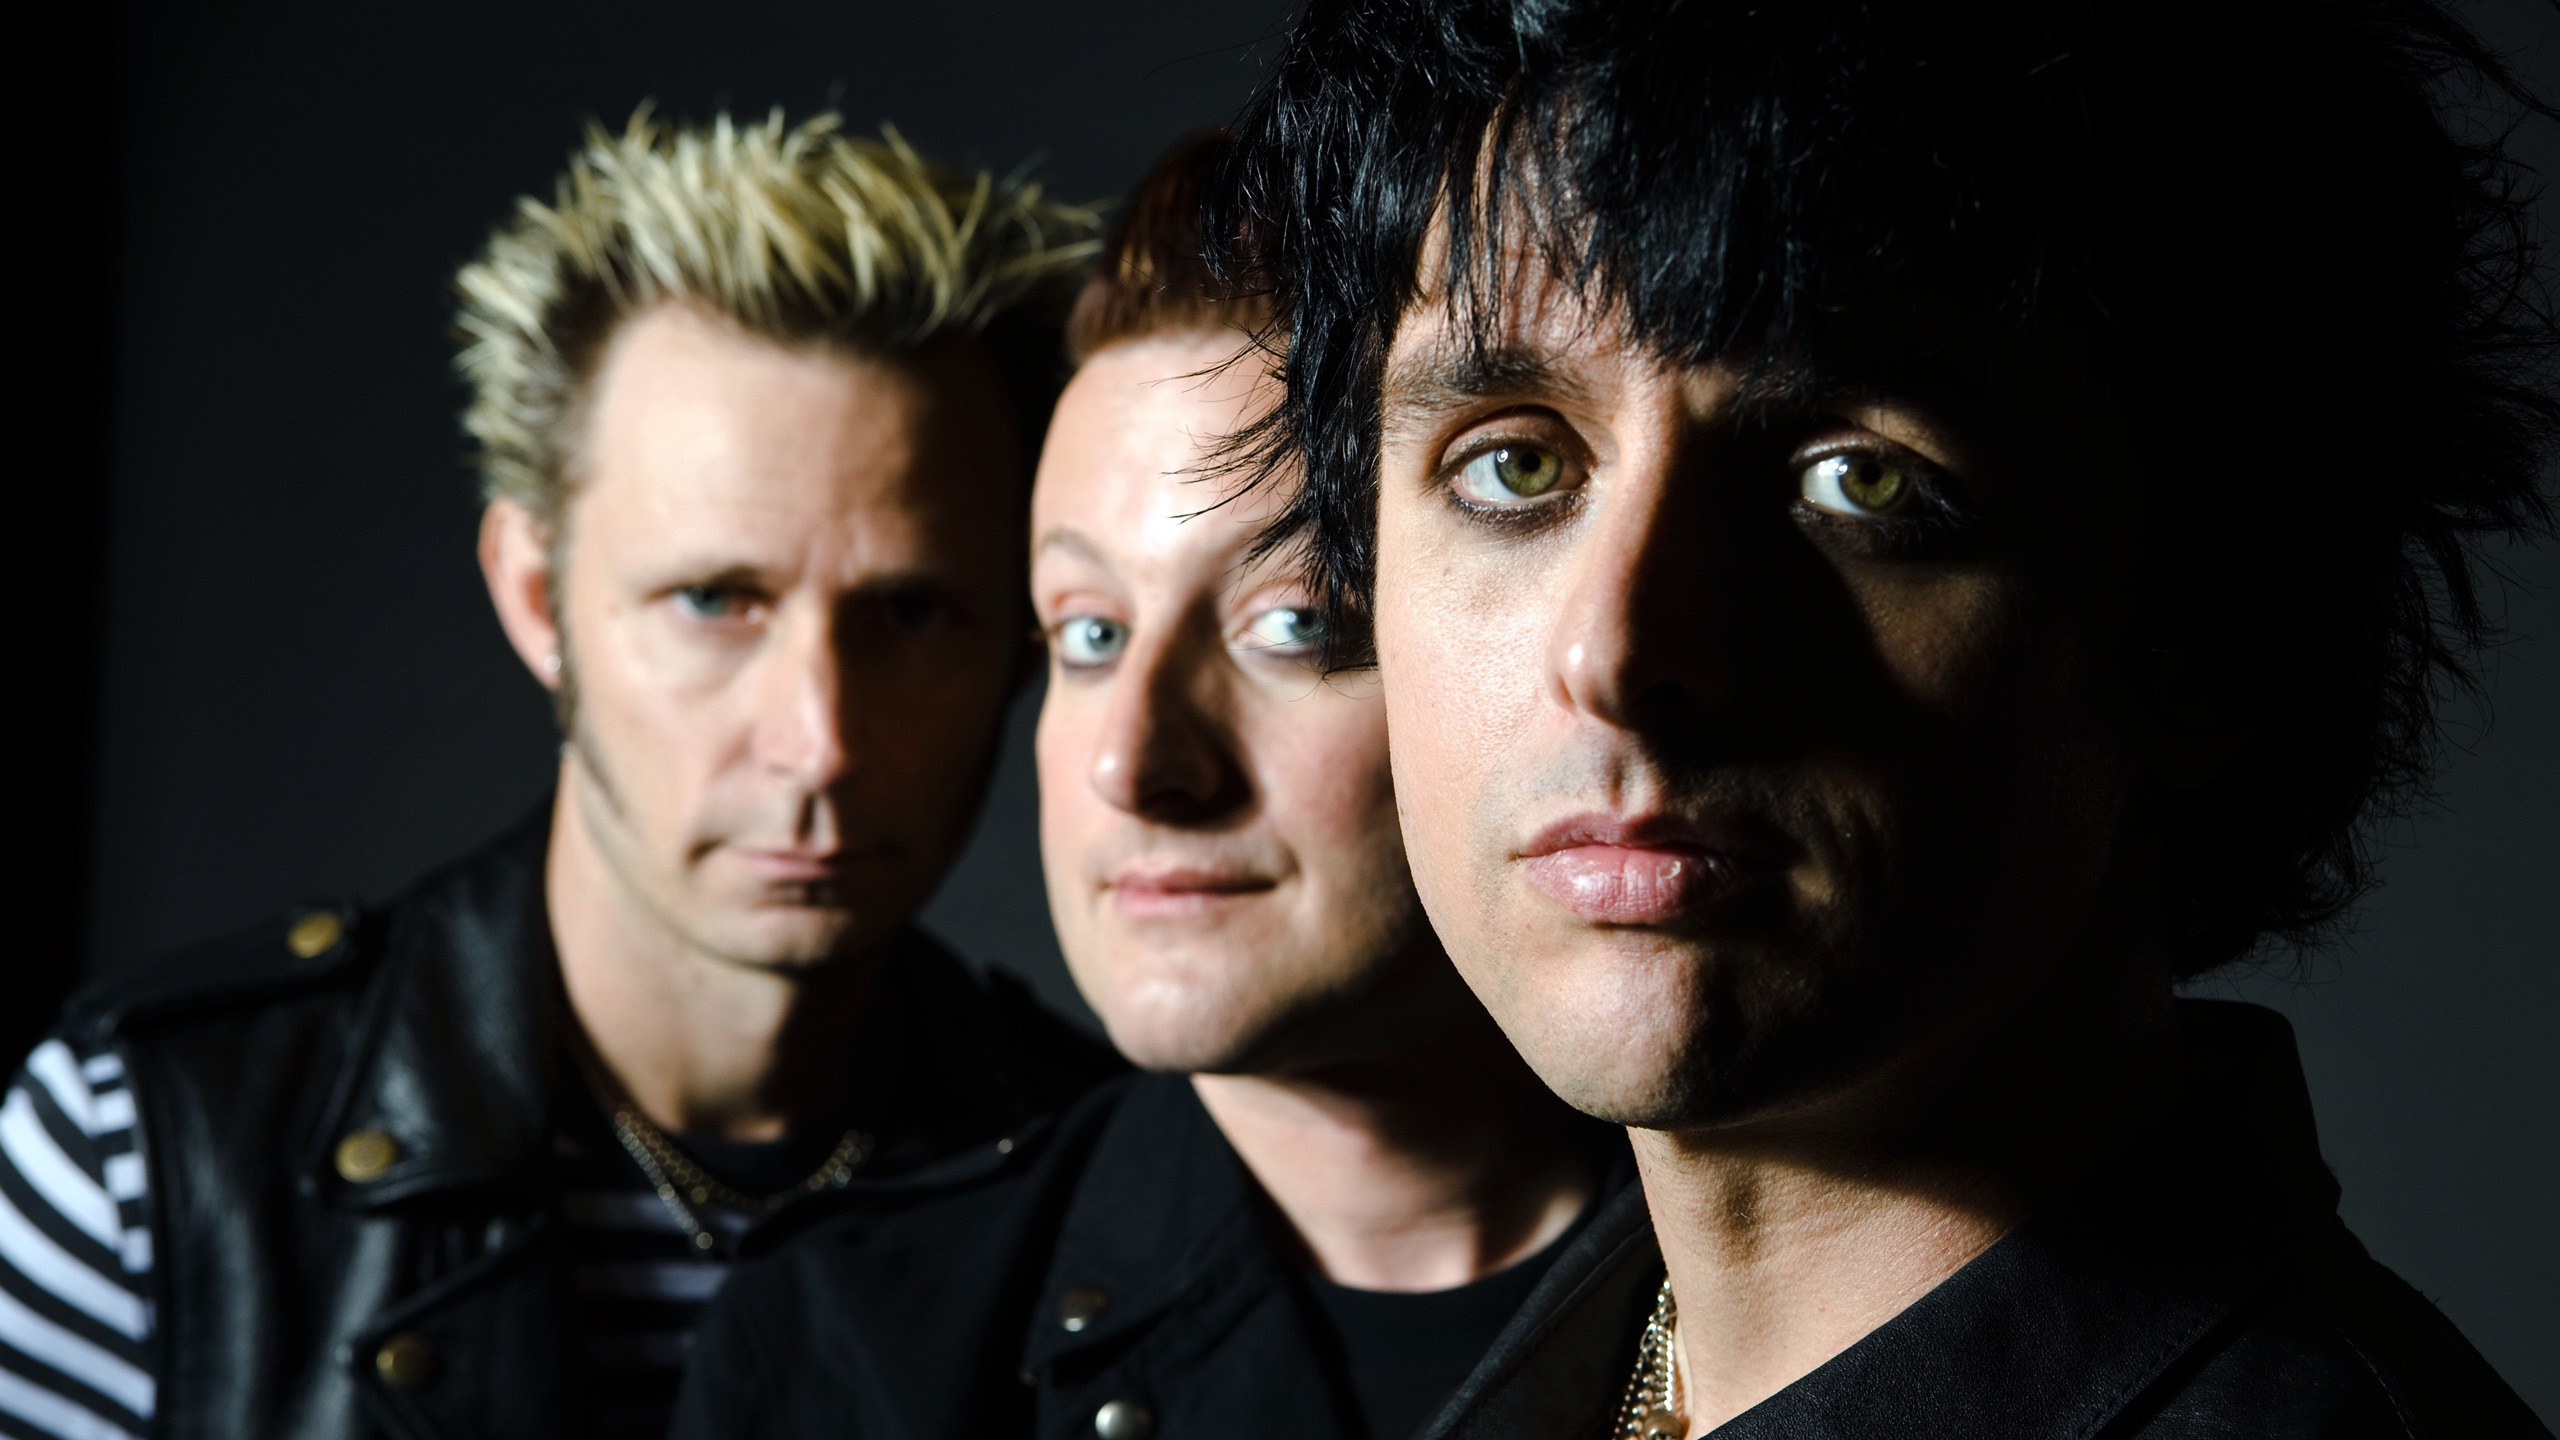 Green Day Band in Blak for 2560x1440 HDTV resolution